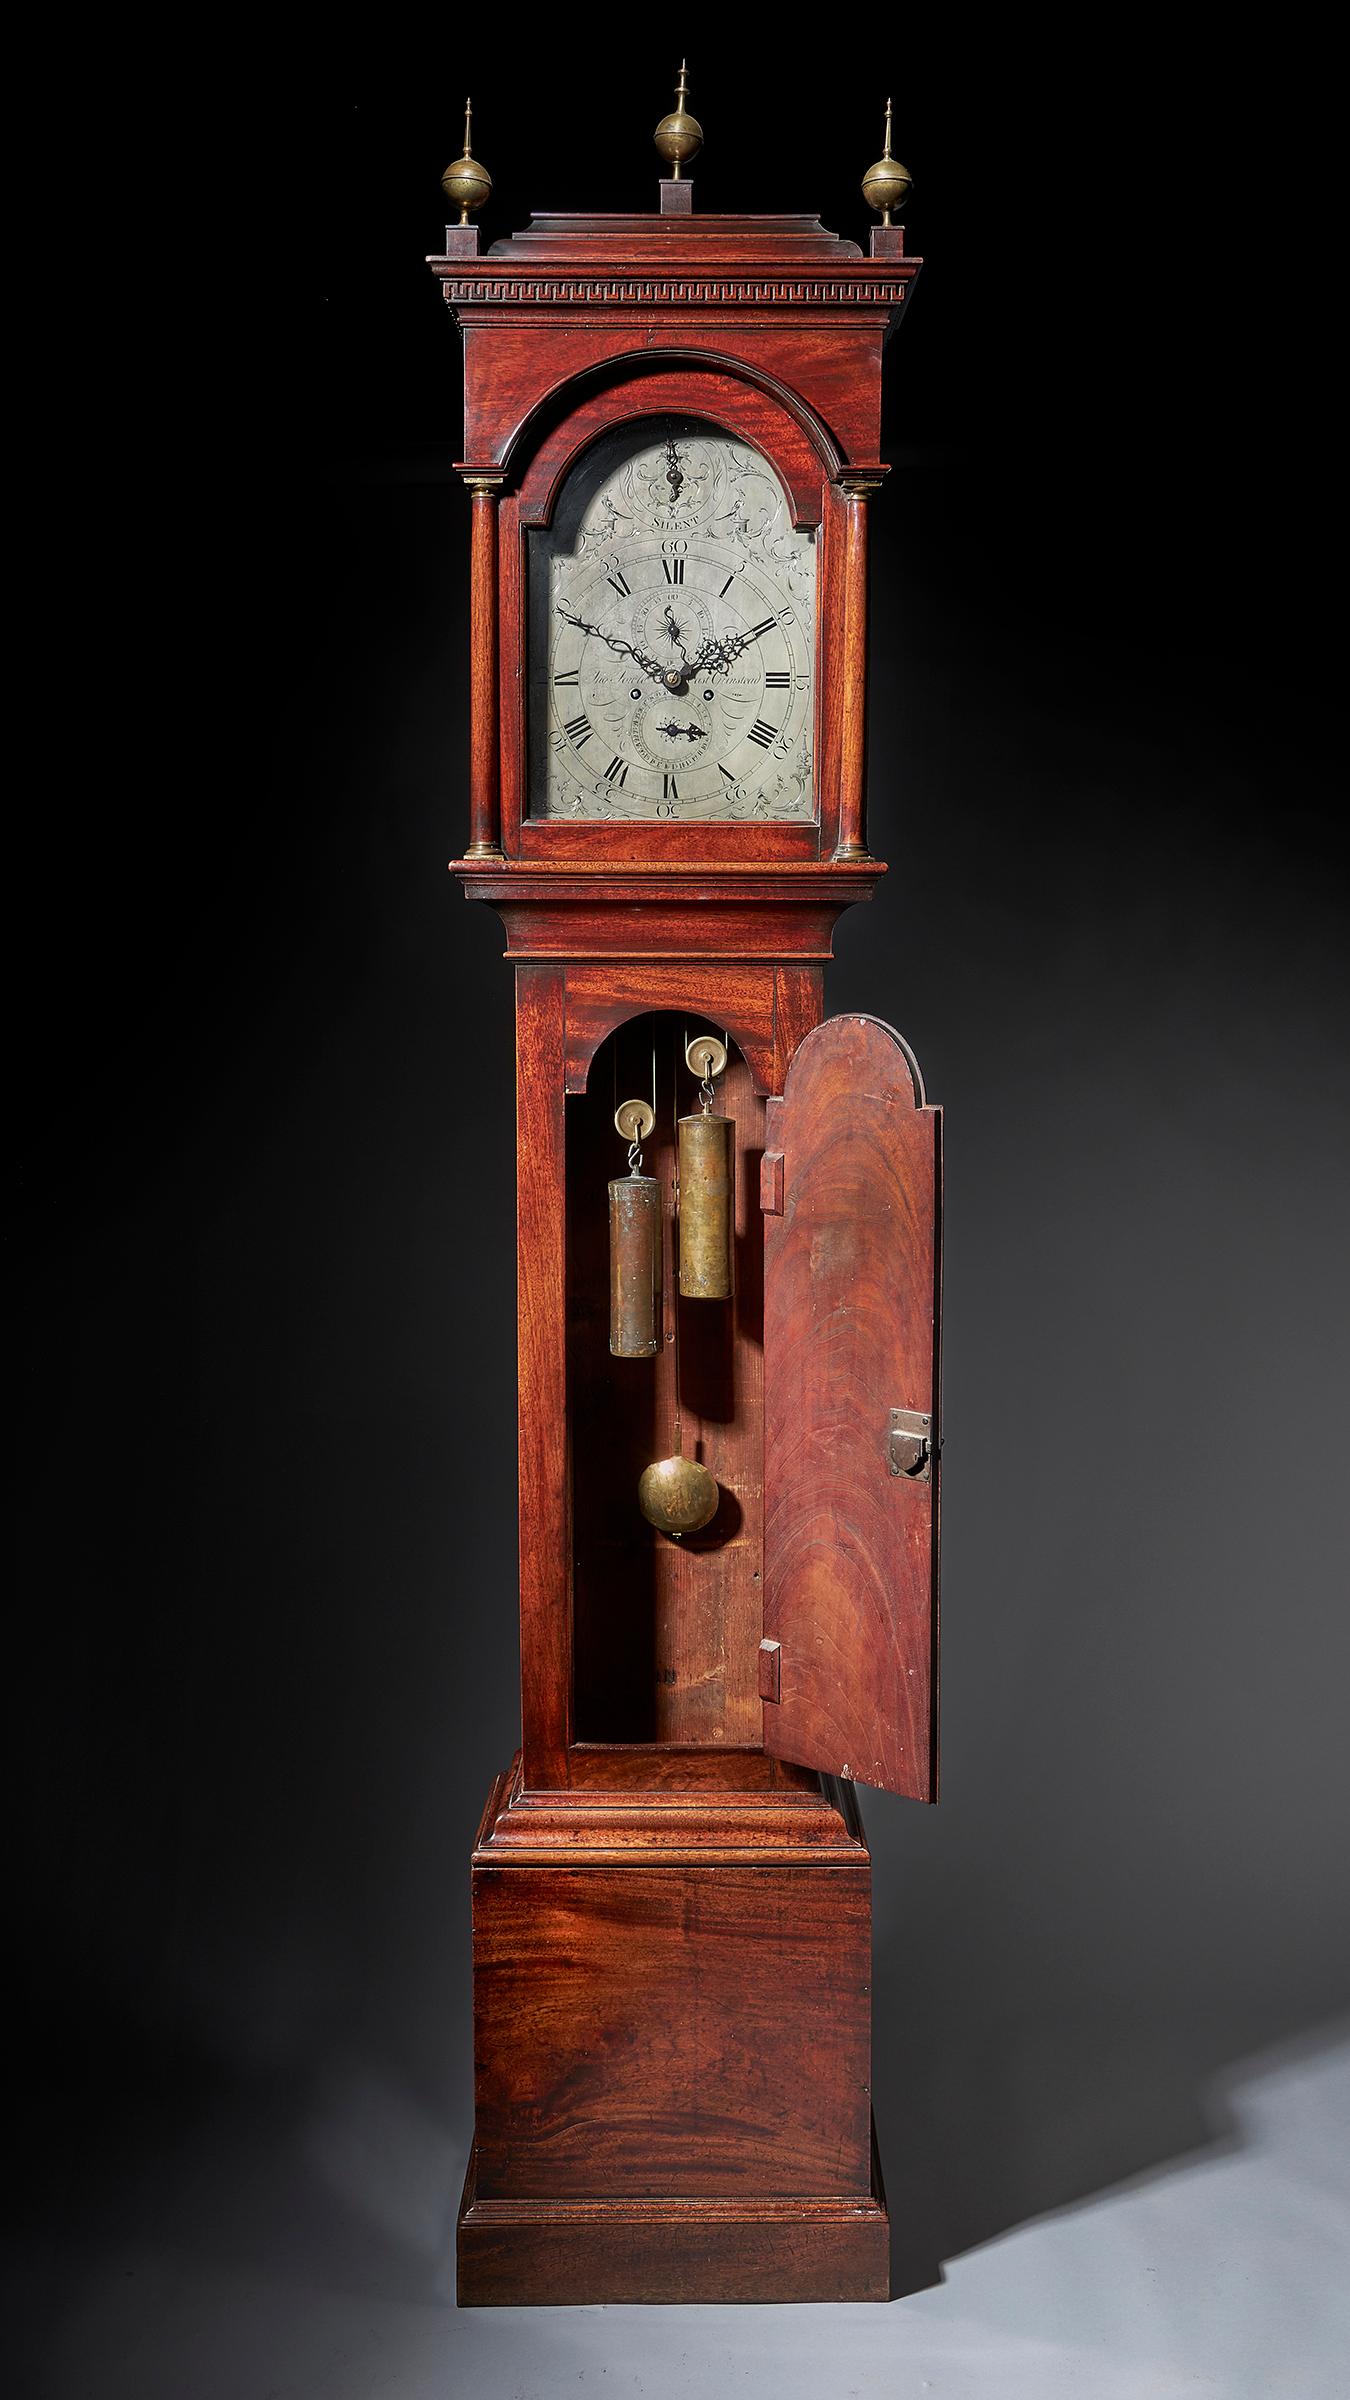 A fine George III period mahogany longcase clock of excellent colour, patination and proportions, circa 1780-1790

Surmounted with three ball and spike brass finials, the inverted bell top hood is decorated with a Greek key frieze below an ovolo